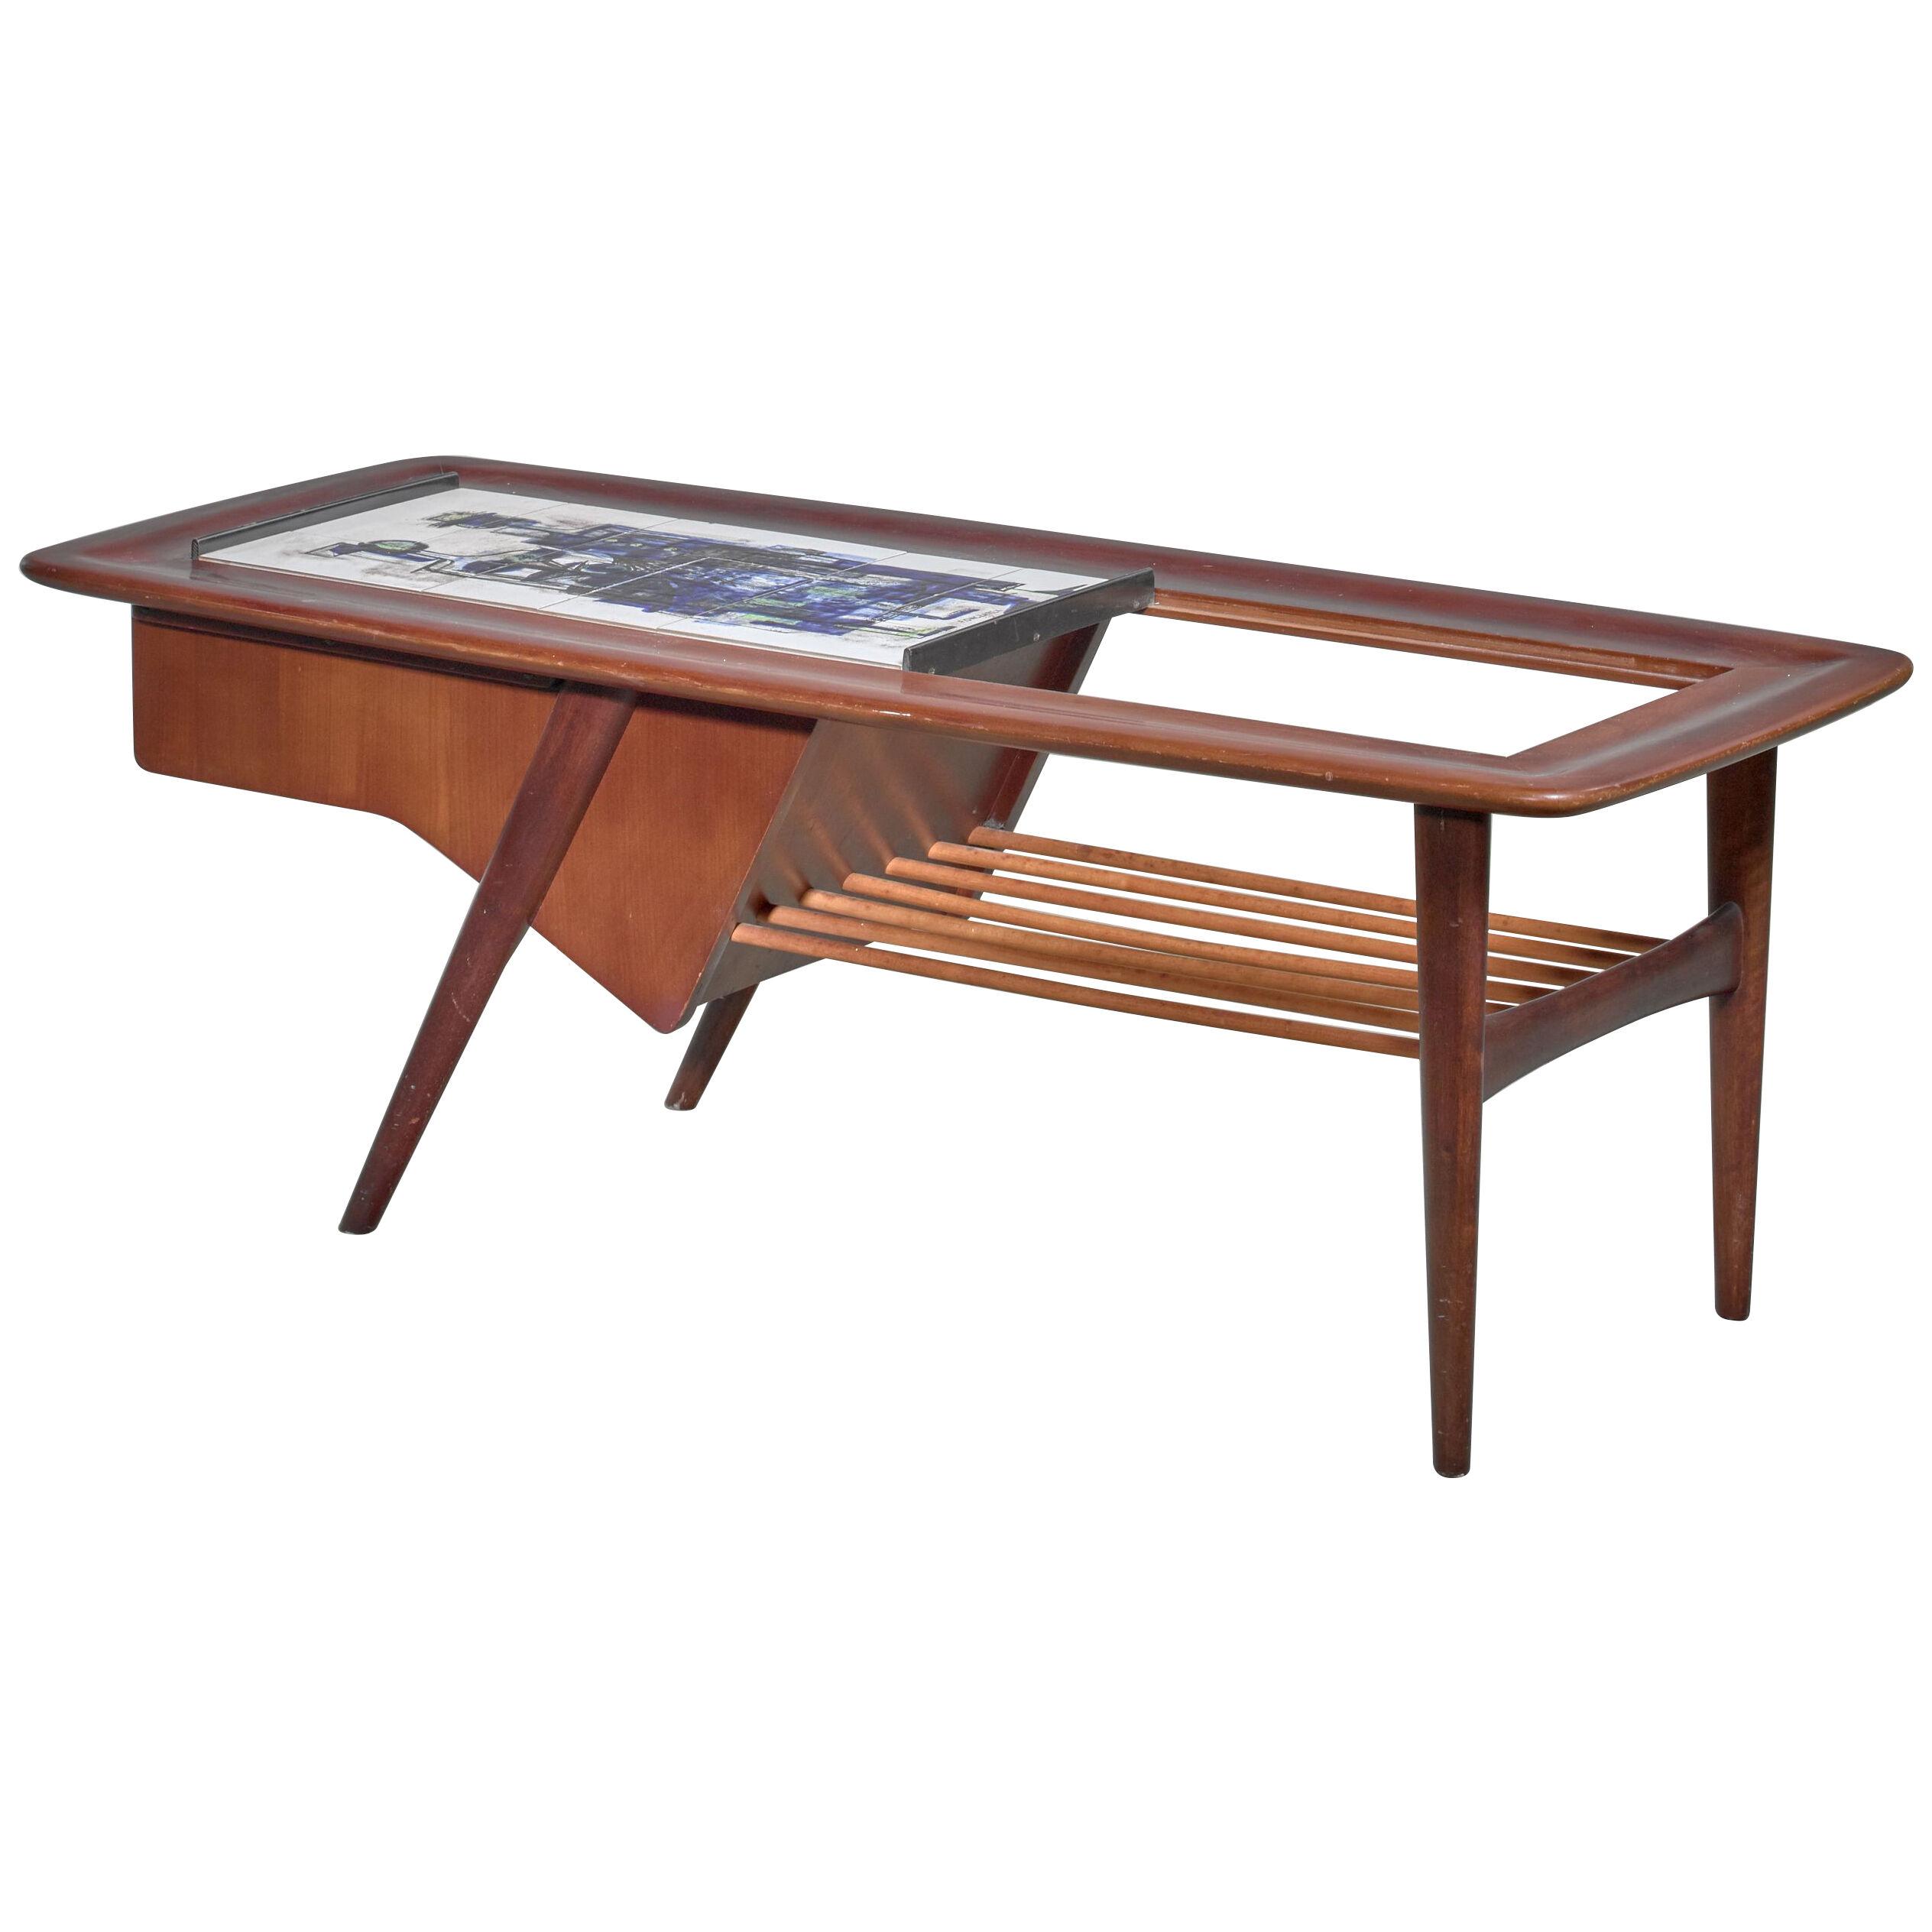 Alfred Hendrickx Rosewood Side Table with Ceramic tiles, Belgium, 1950s